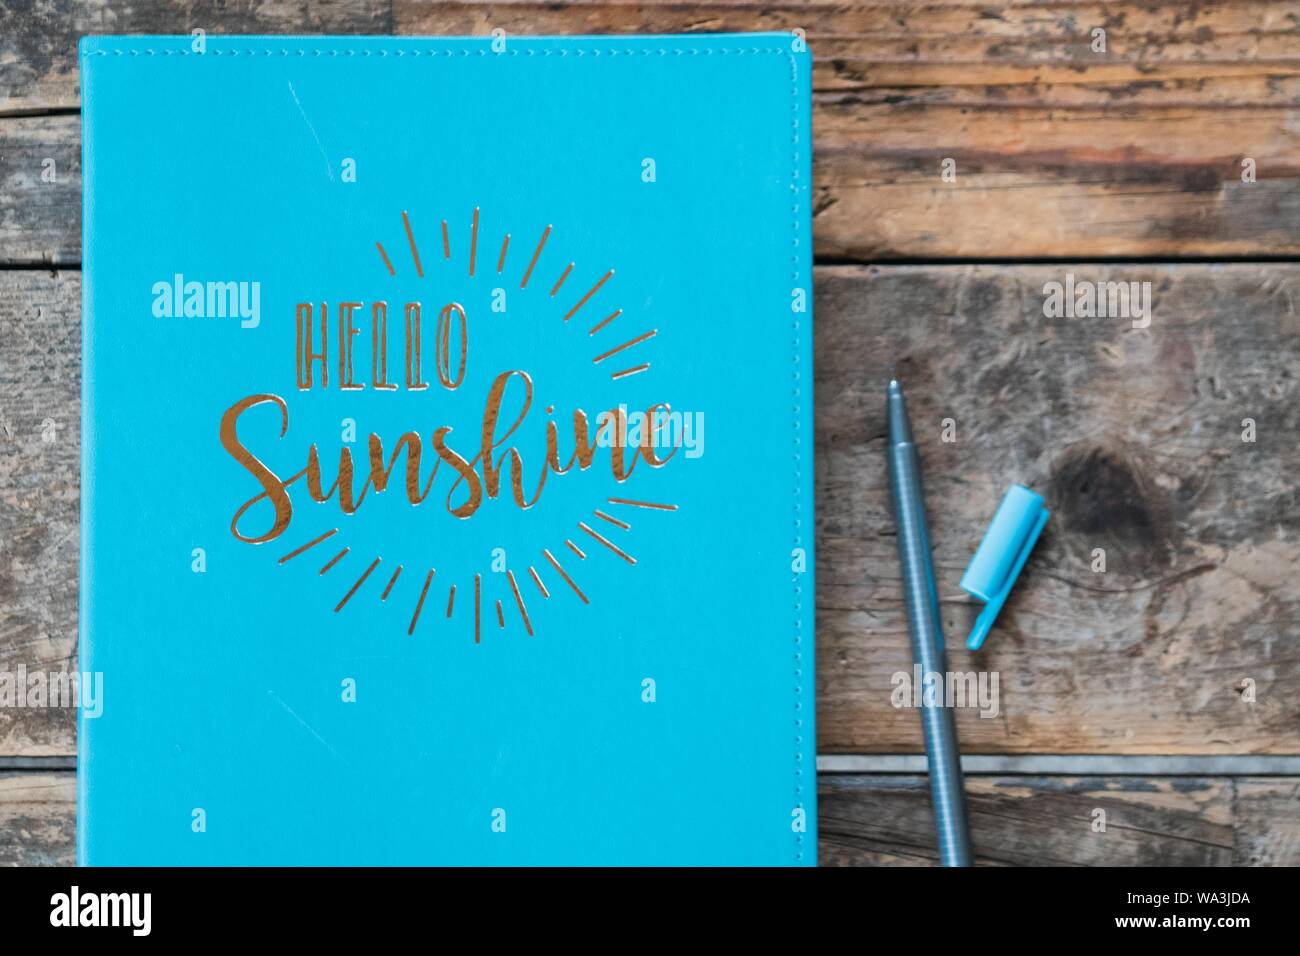 Overhead shot of a 'hello sunshine' blue textbook with a ball-point pen next to it on wooden surface Stock Photo